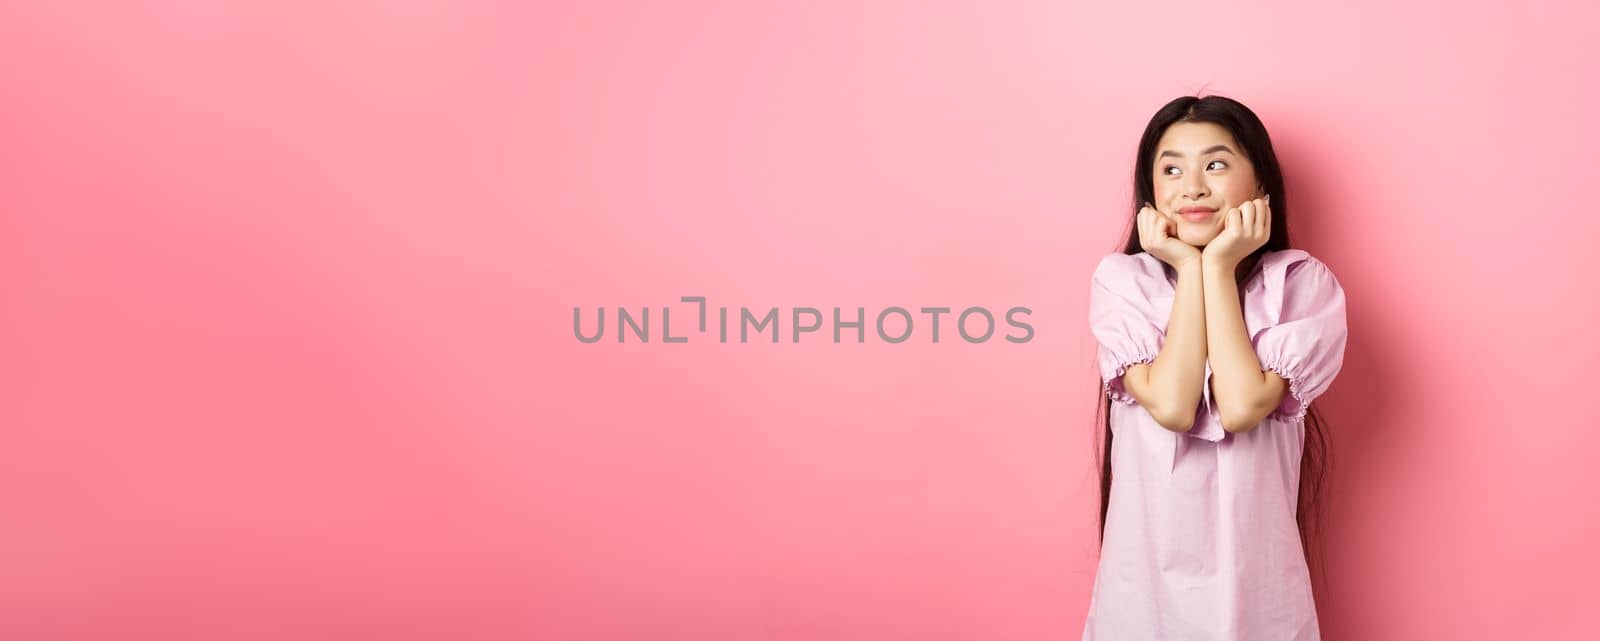 Dreamy romantic girl looking aside at logo and smiling, thinking of something beautiful, standing on pink background.